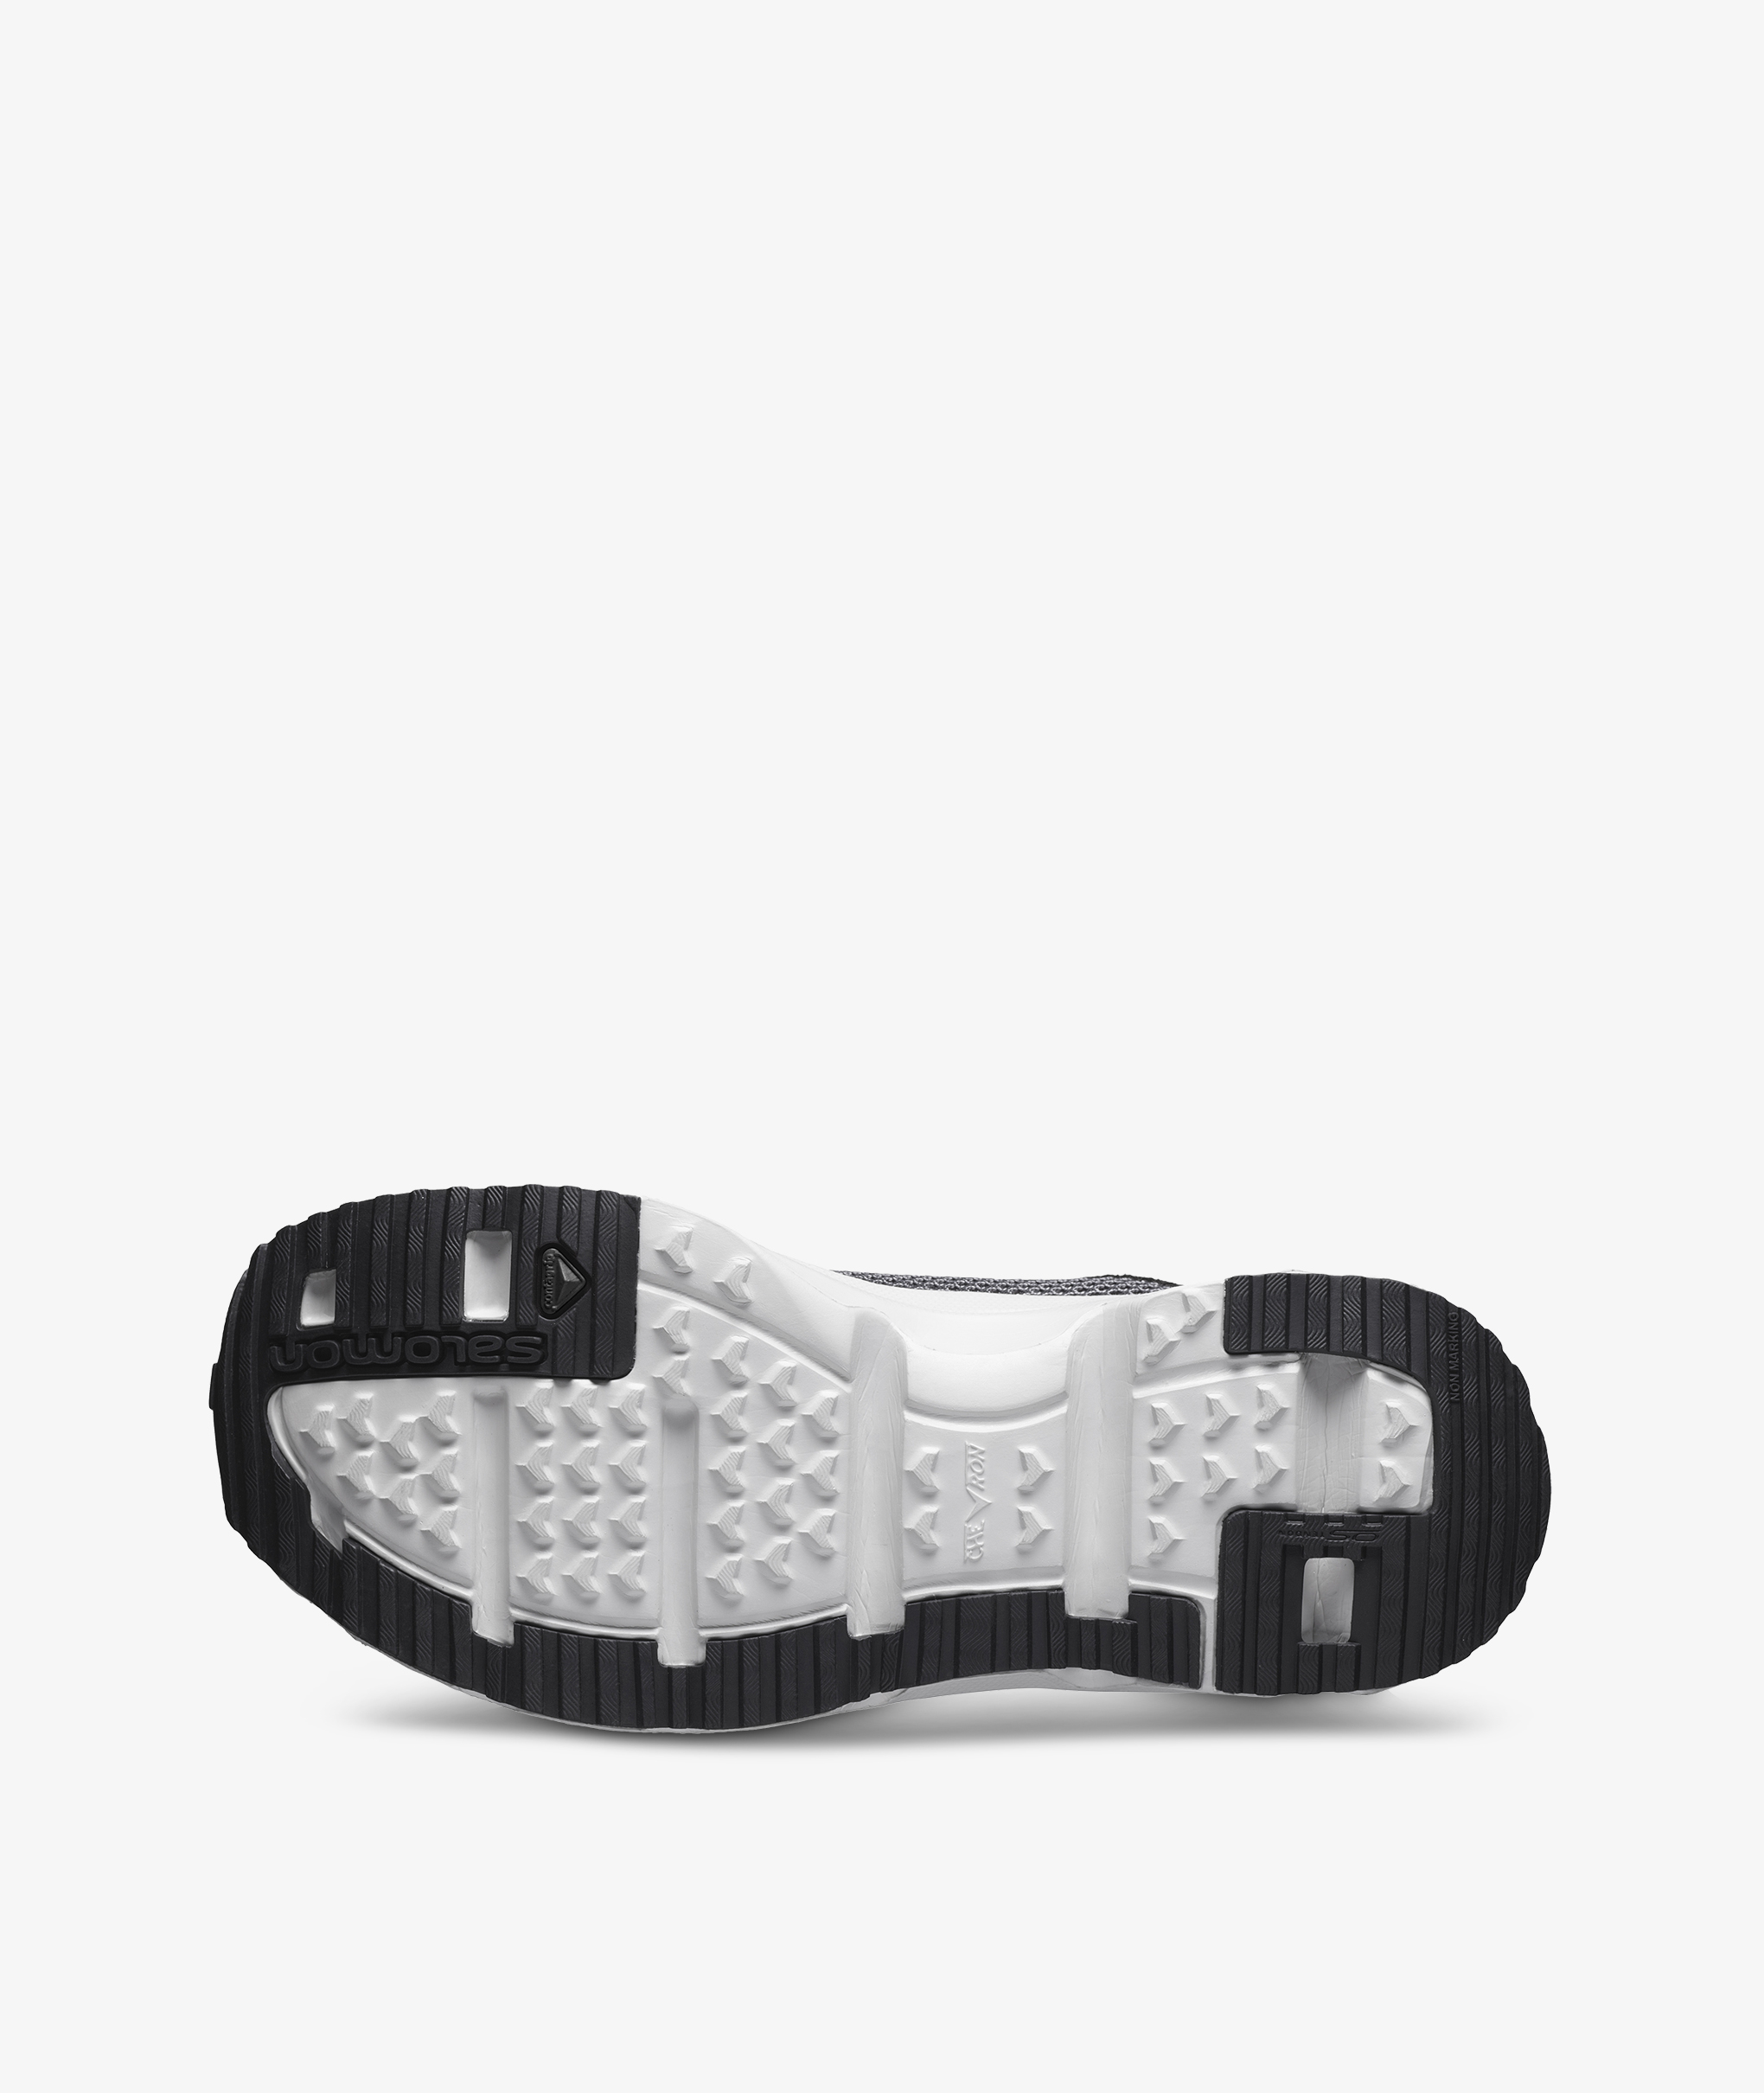 Norse Store | Shipping Worldwide - Salomon RX Slide 3.0 For Beams